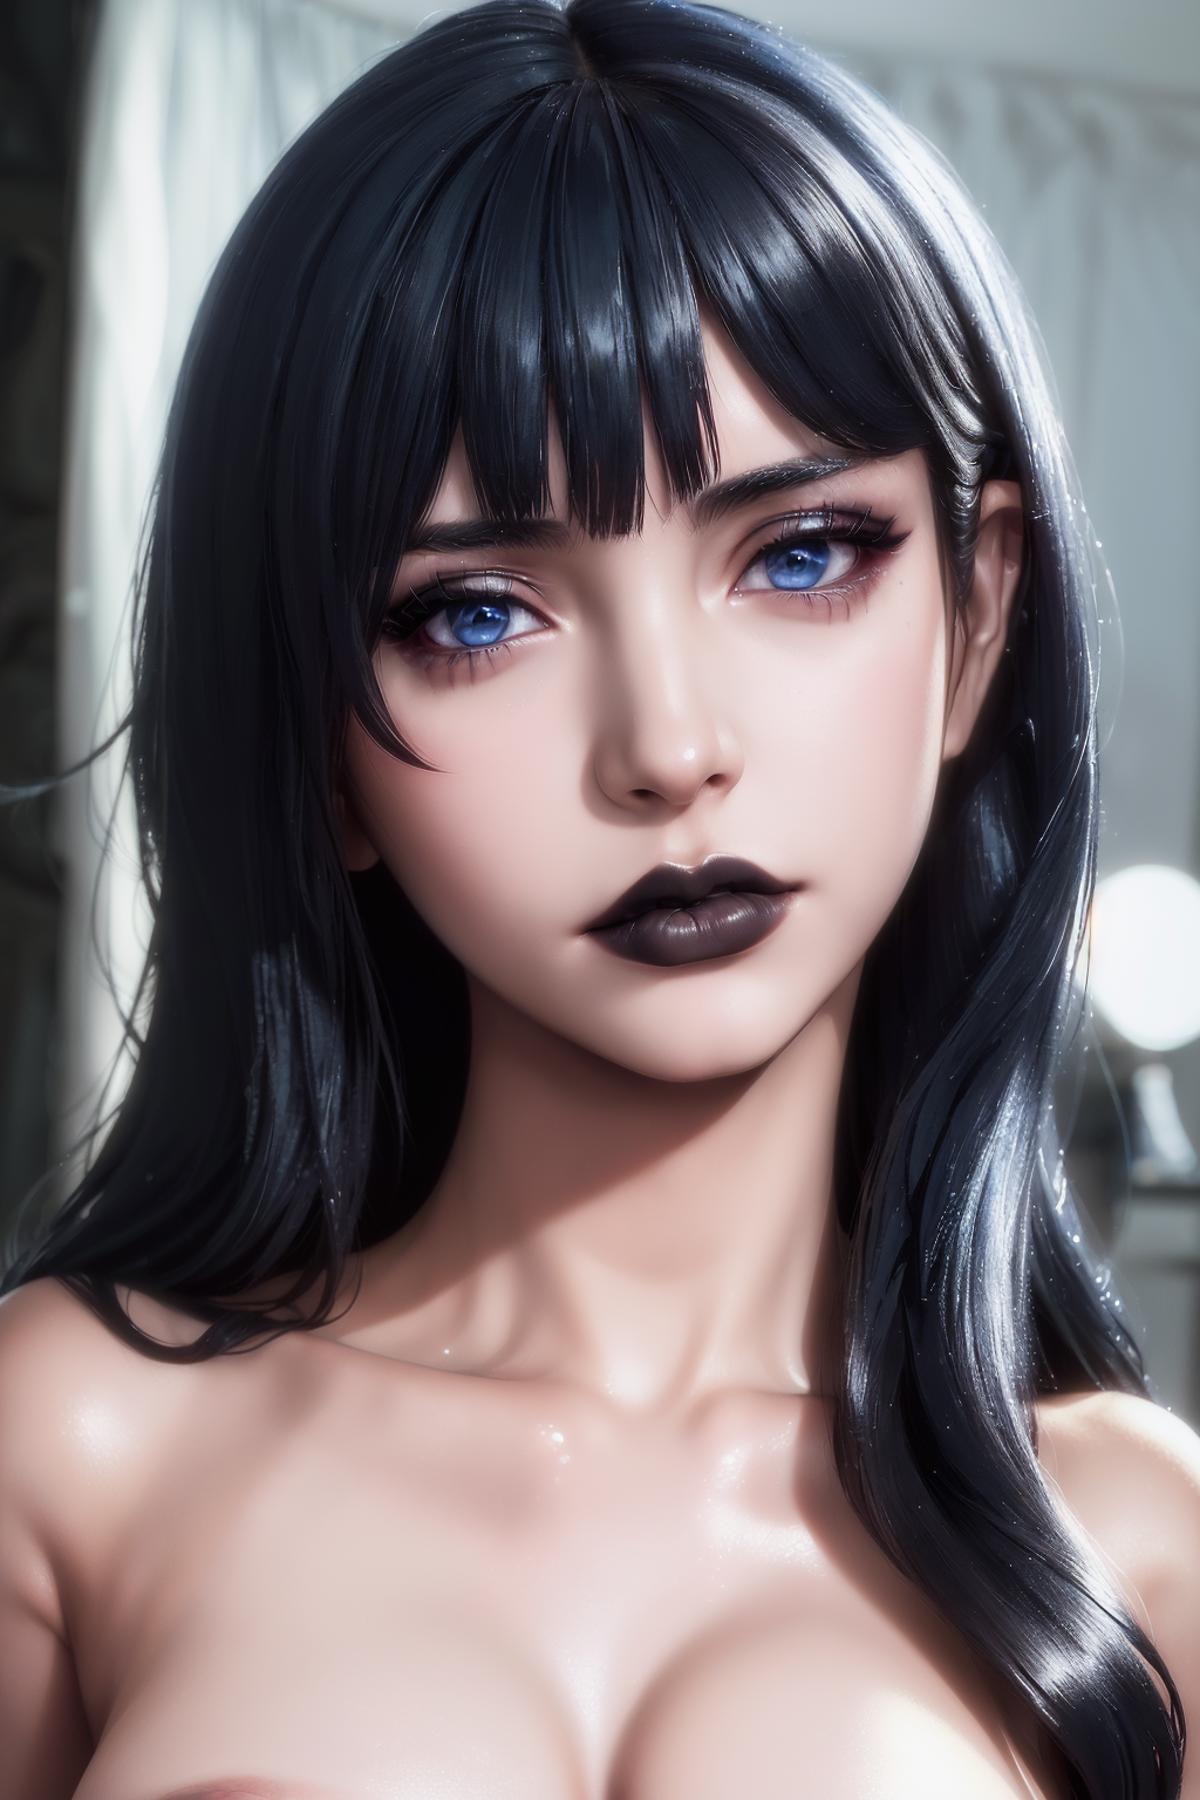 AI model image by mustcclee169